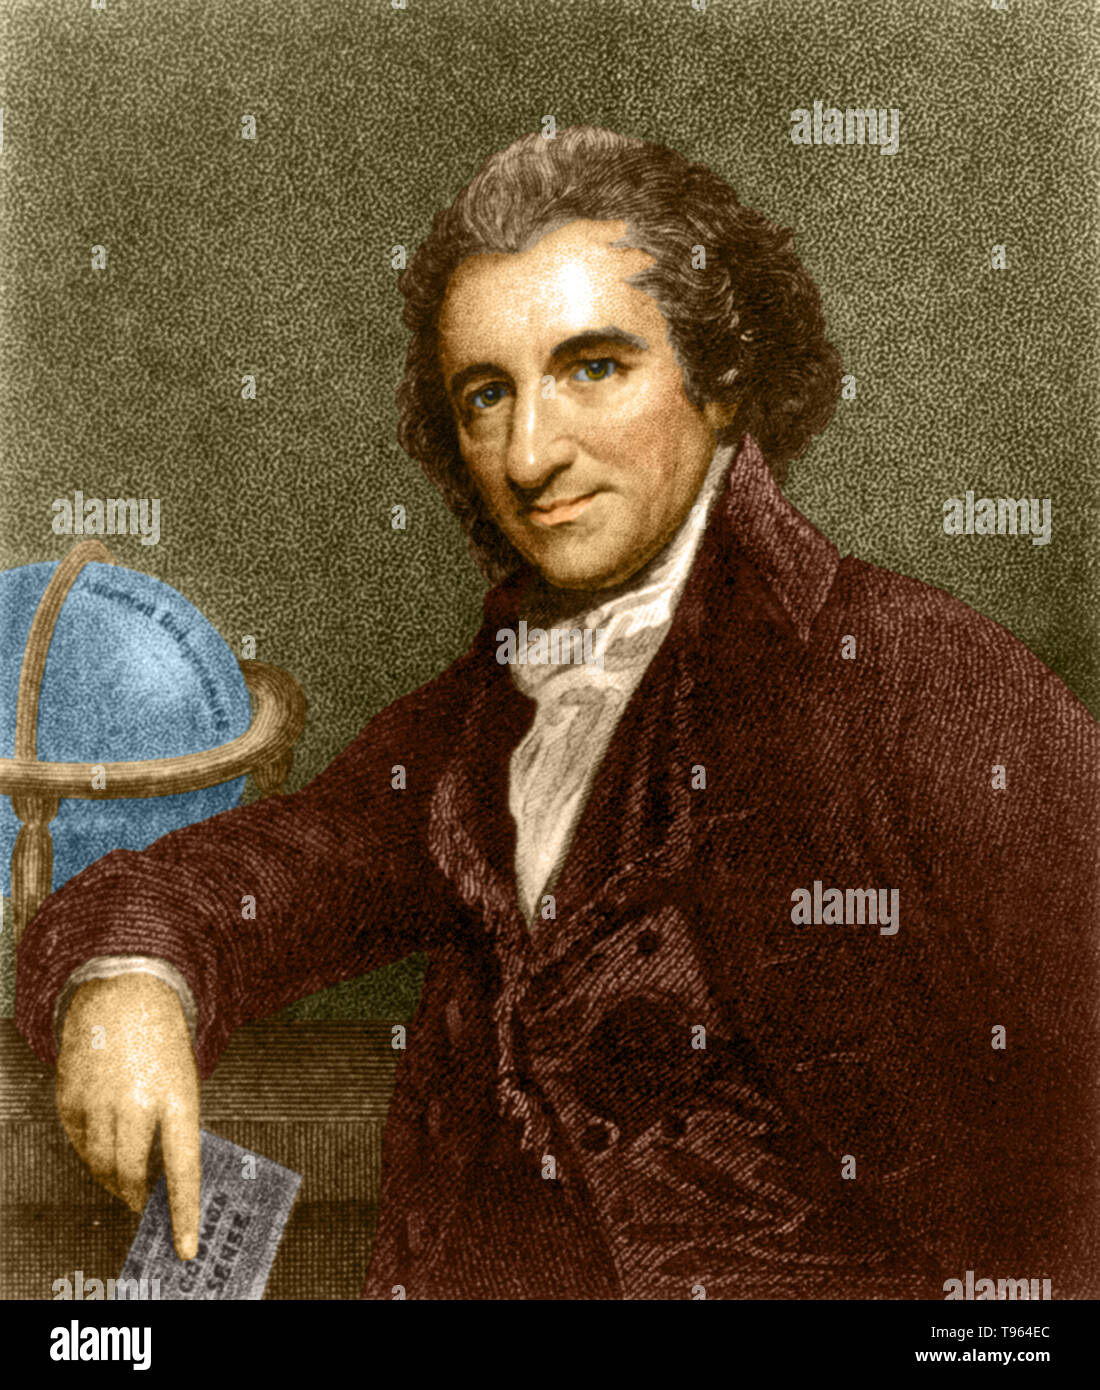 Thomas Paine (February 9, 1737 - June 8, 1809) was an American political activist, philosopher, political theorist, and one of the Founding Fathers of the USA. His pamphlet, Common Sense, inspired people to declare and fight for independence from Great Britain in the summer of 1776. The pamphlet explained the advantages of and the need for immediate independence in clear, simple language. It was published anonymously and became an immediate sensation. Stock Photo